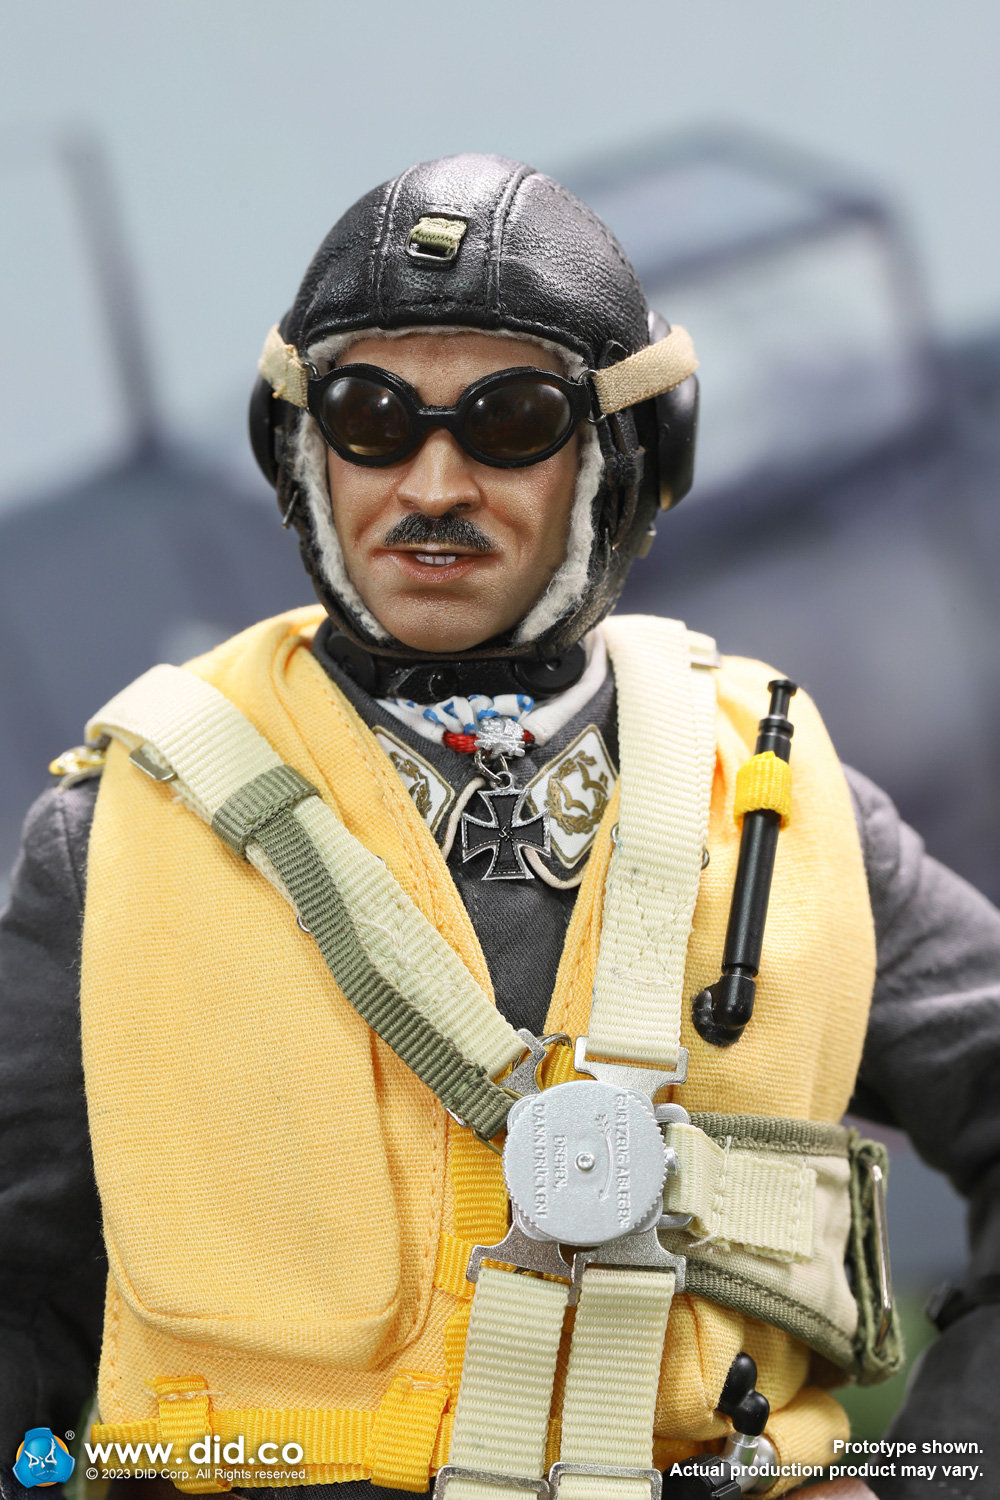 NEW PRODUCT: DiD: D80165 WWII German Luftwaffe Ace Pilot – Adolf Galland 1823